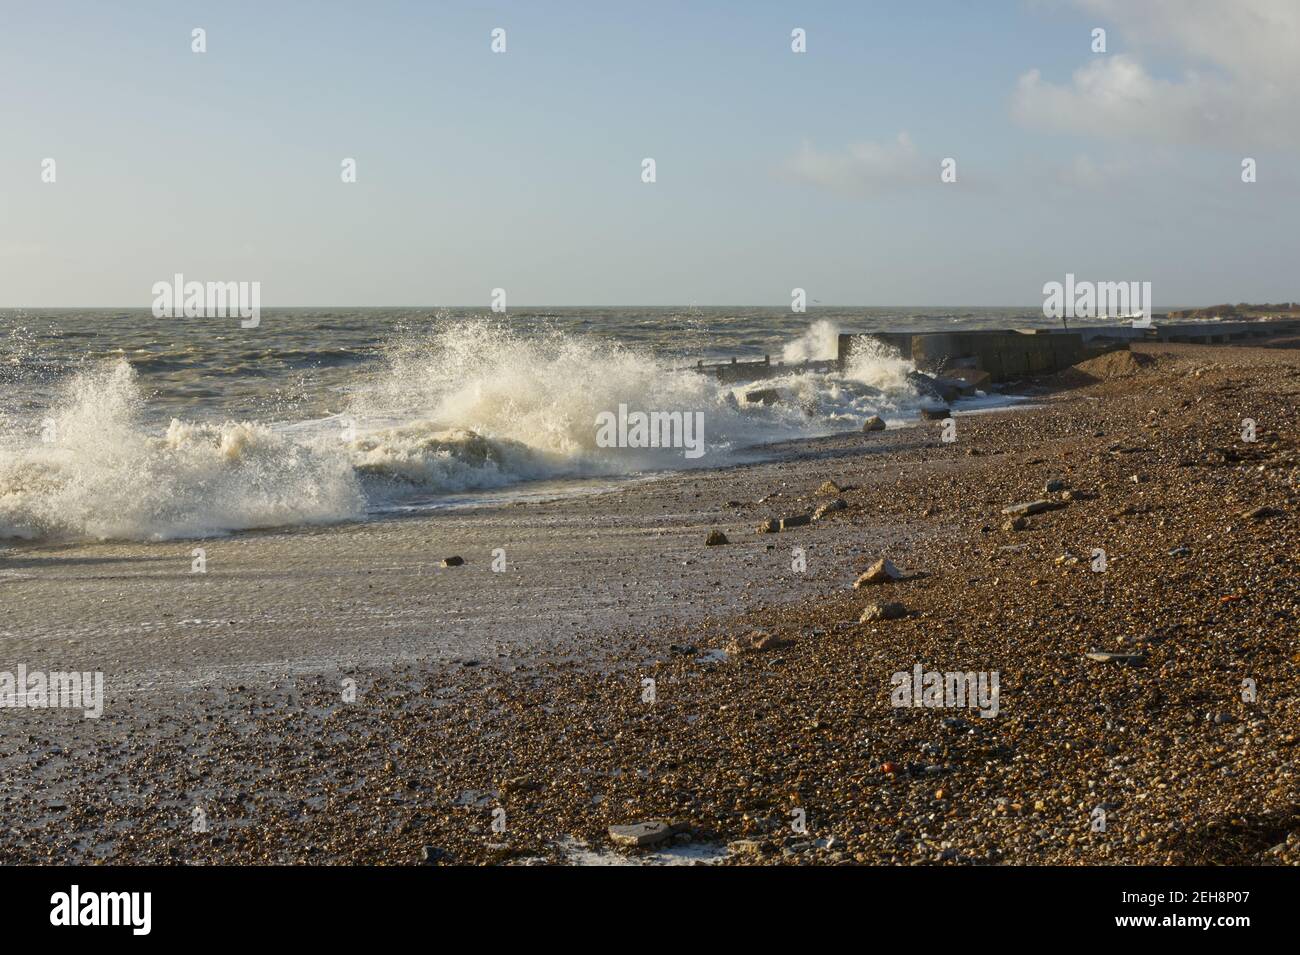 Stormy weather with waves on shingle beach at Climping near Littlehampton, West Sussex, England. Storm damage to coastal defences. Stock Photo